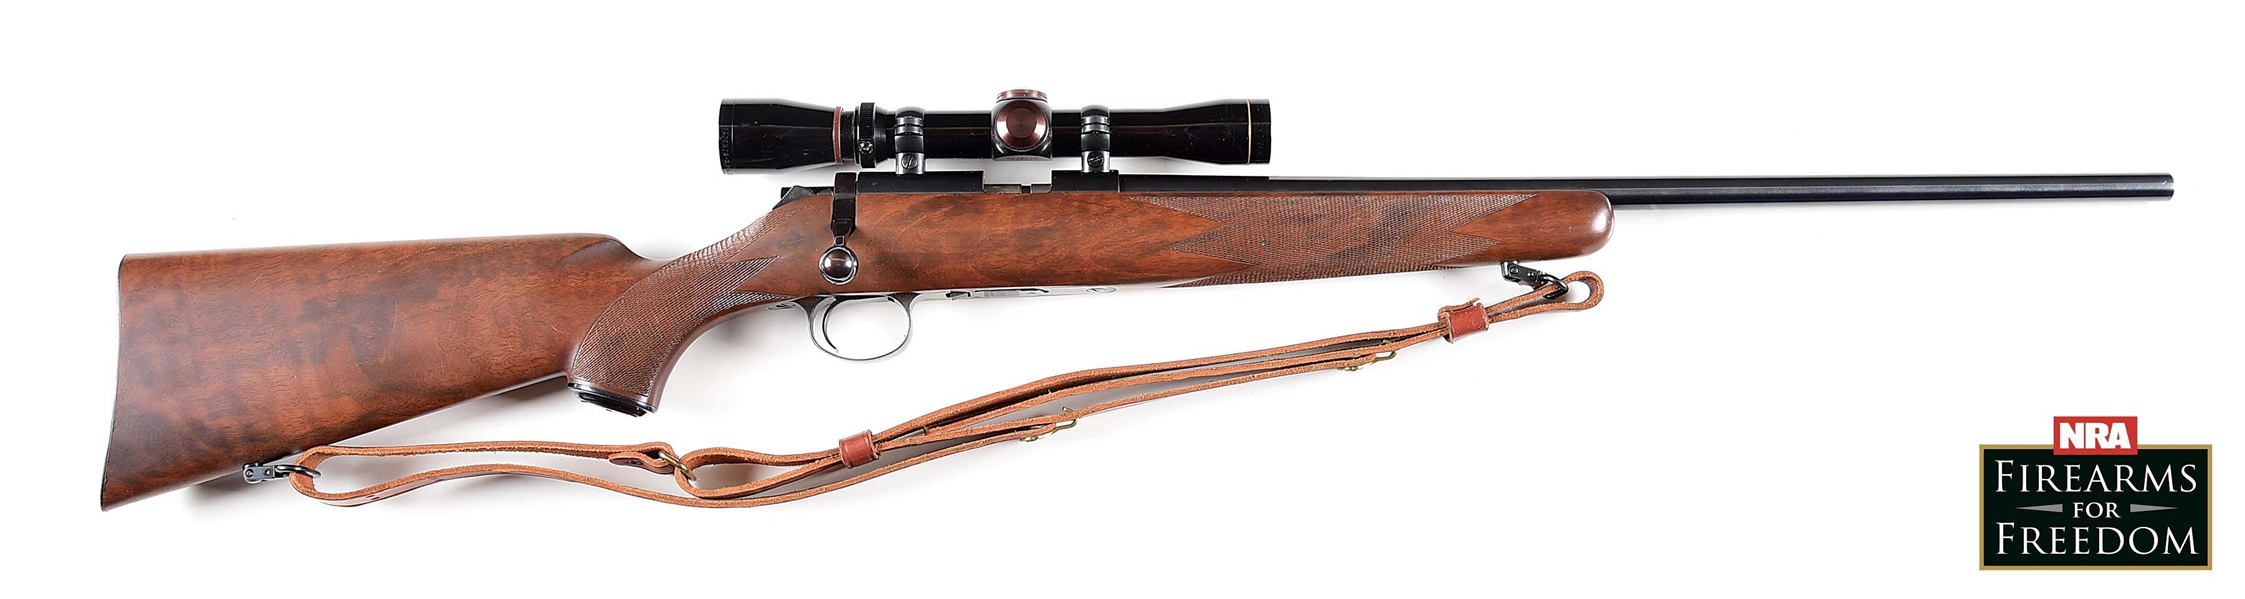 (M) KIMBER MODEL 82 BOLT ACTION RIFLE IN .22 WINCHESTER MAGNUM.